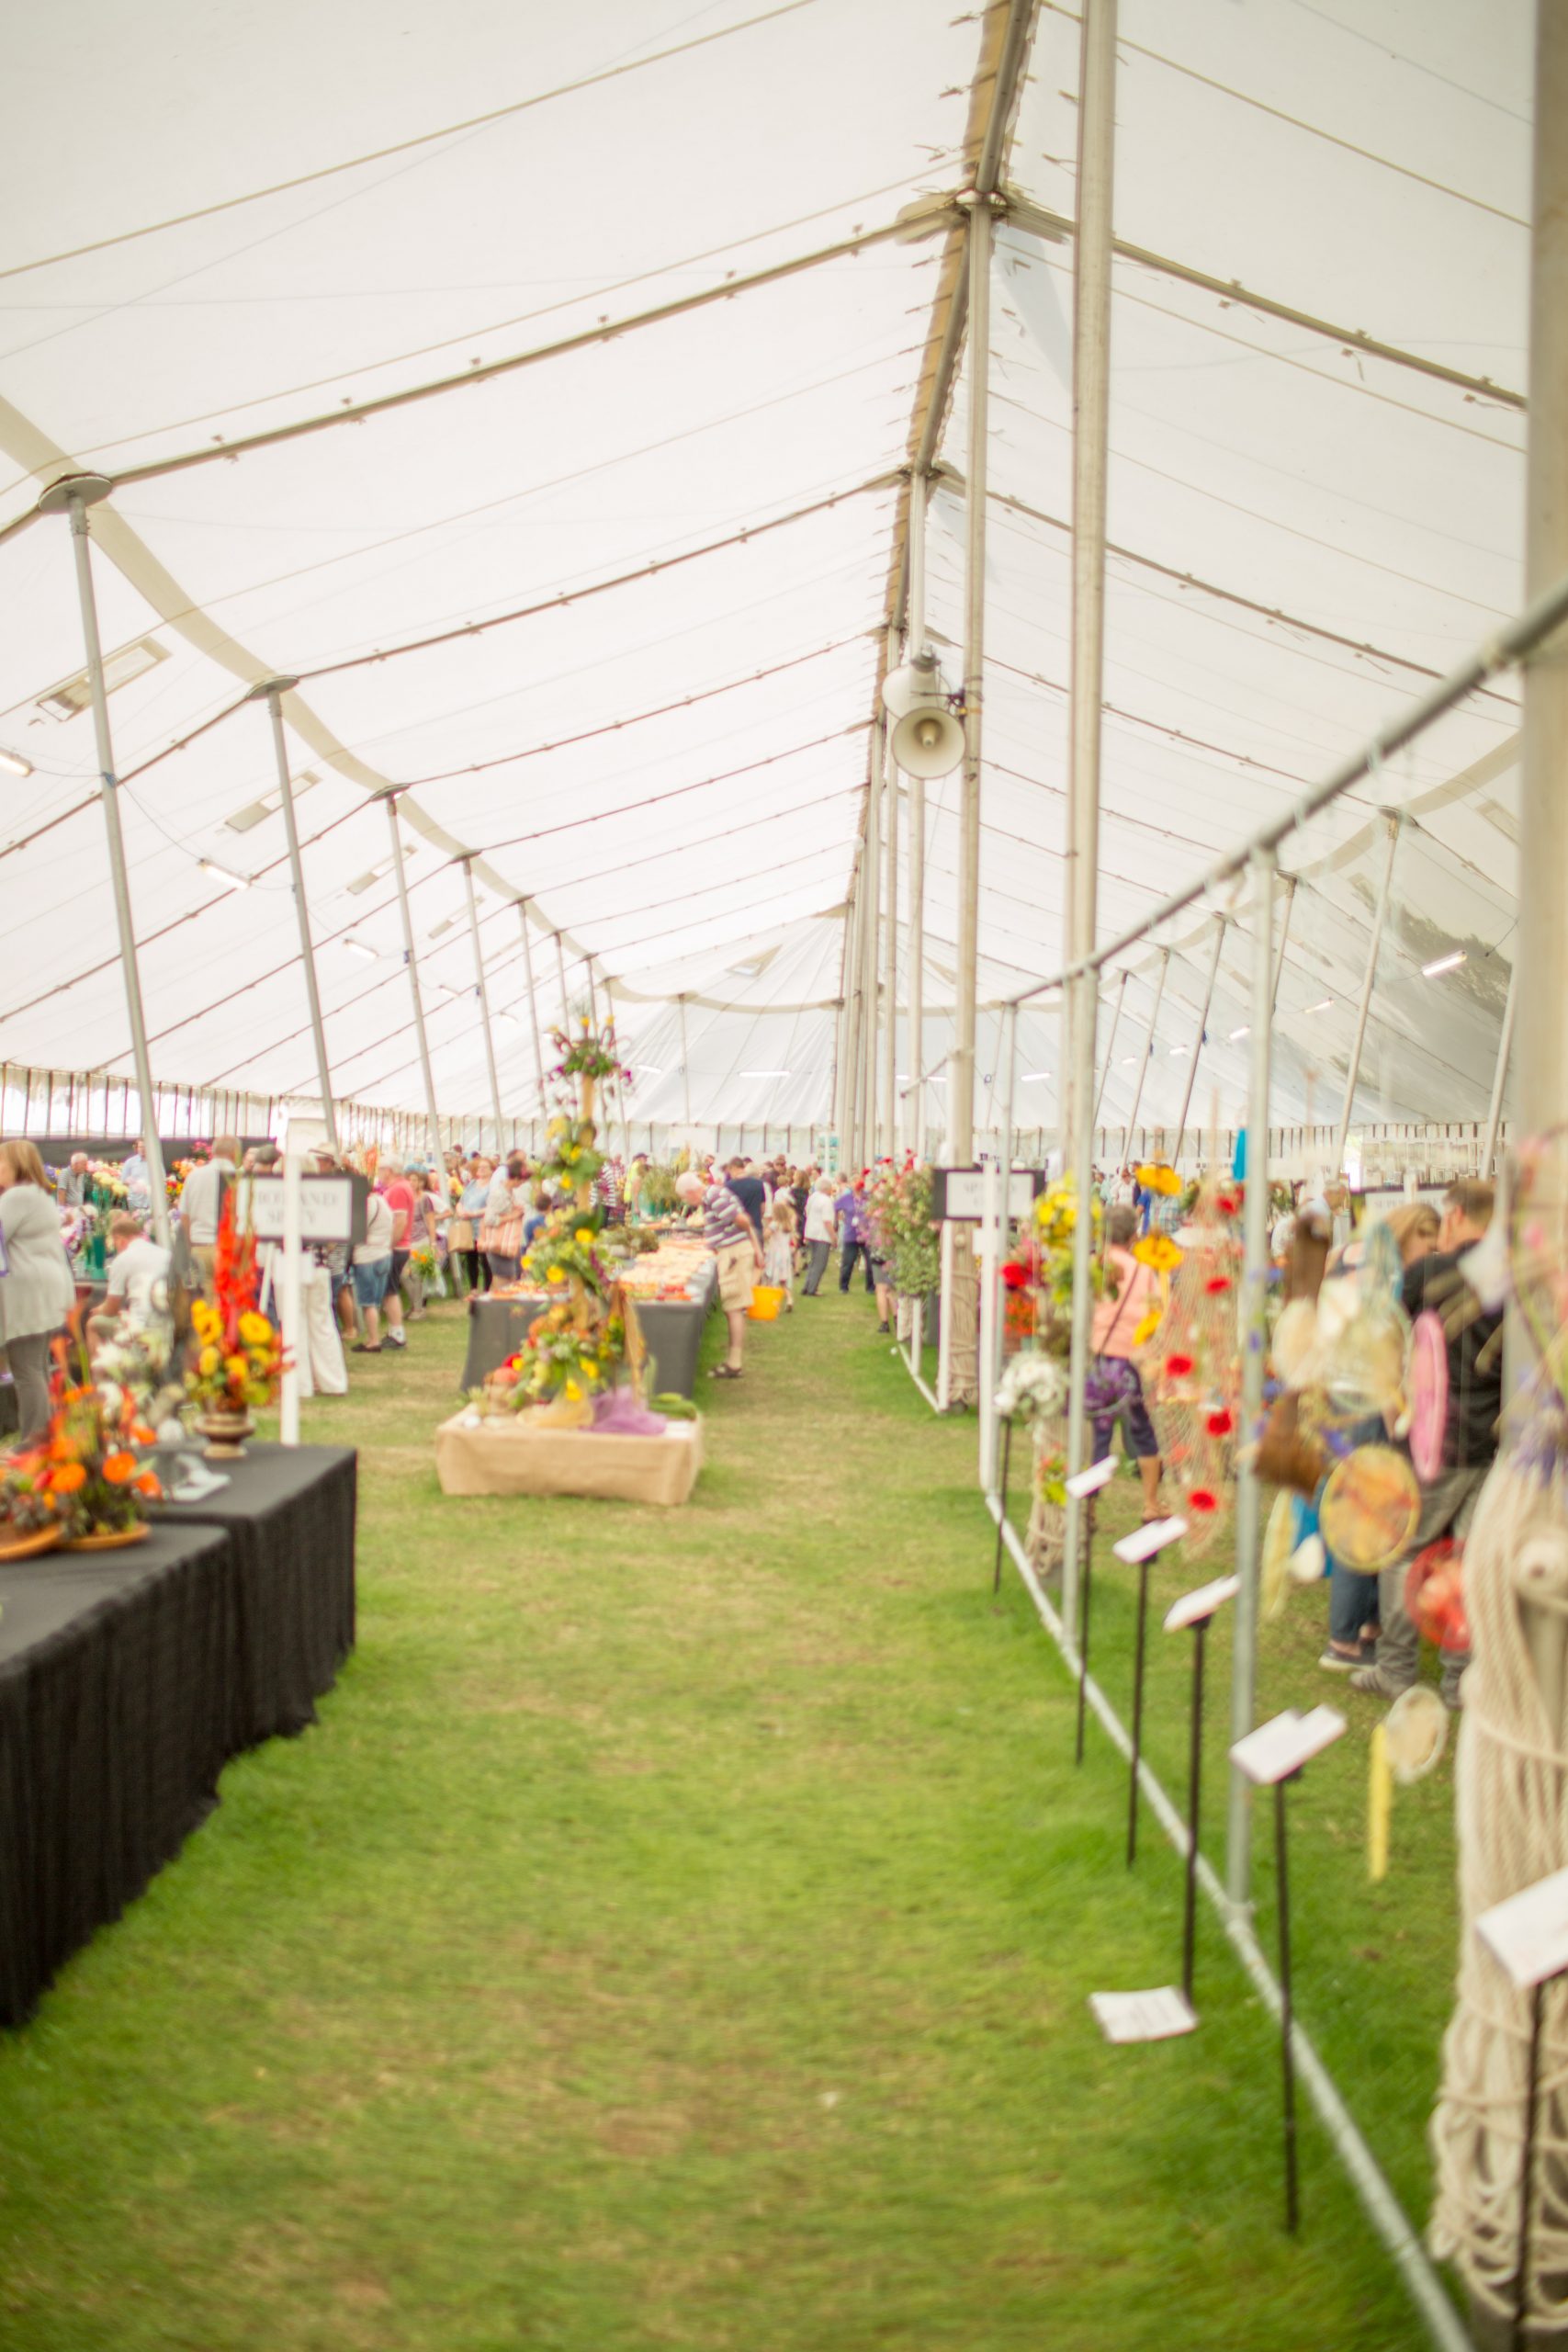 View of the inside of the Competition Marquee at Taunton Flower Show